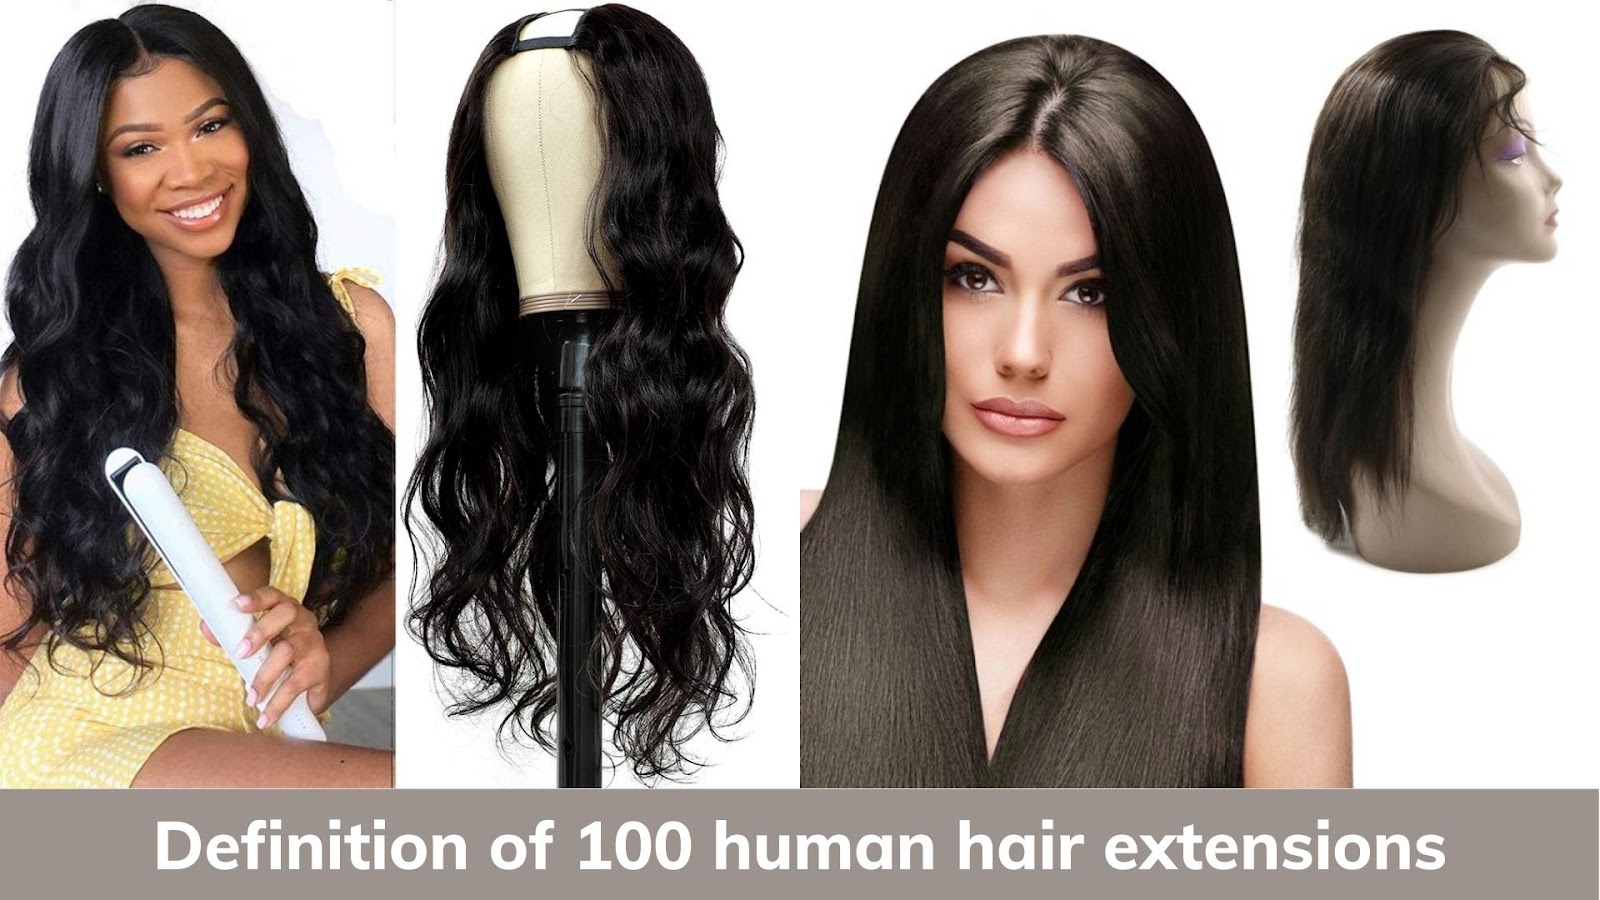 Definition of 100 human hair extensions